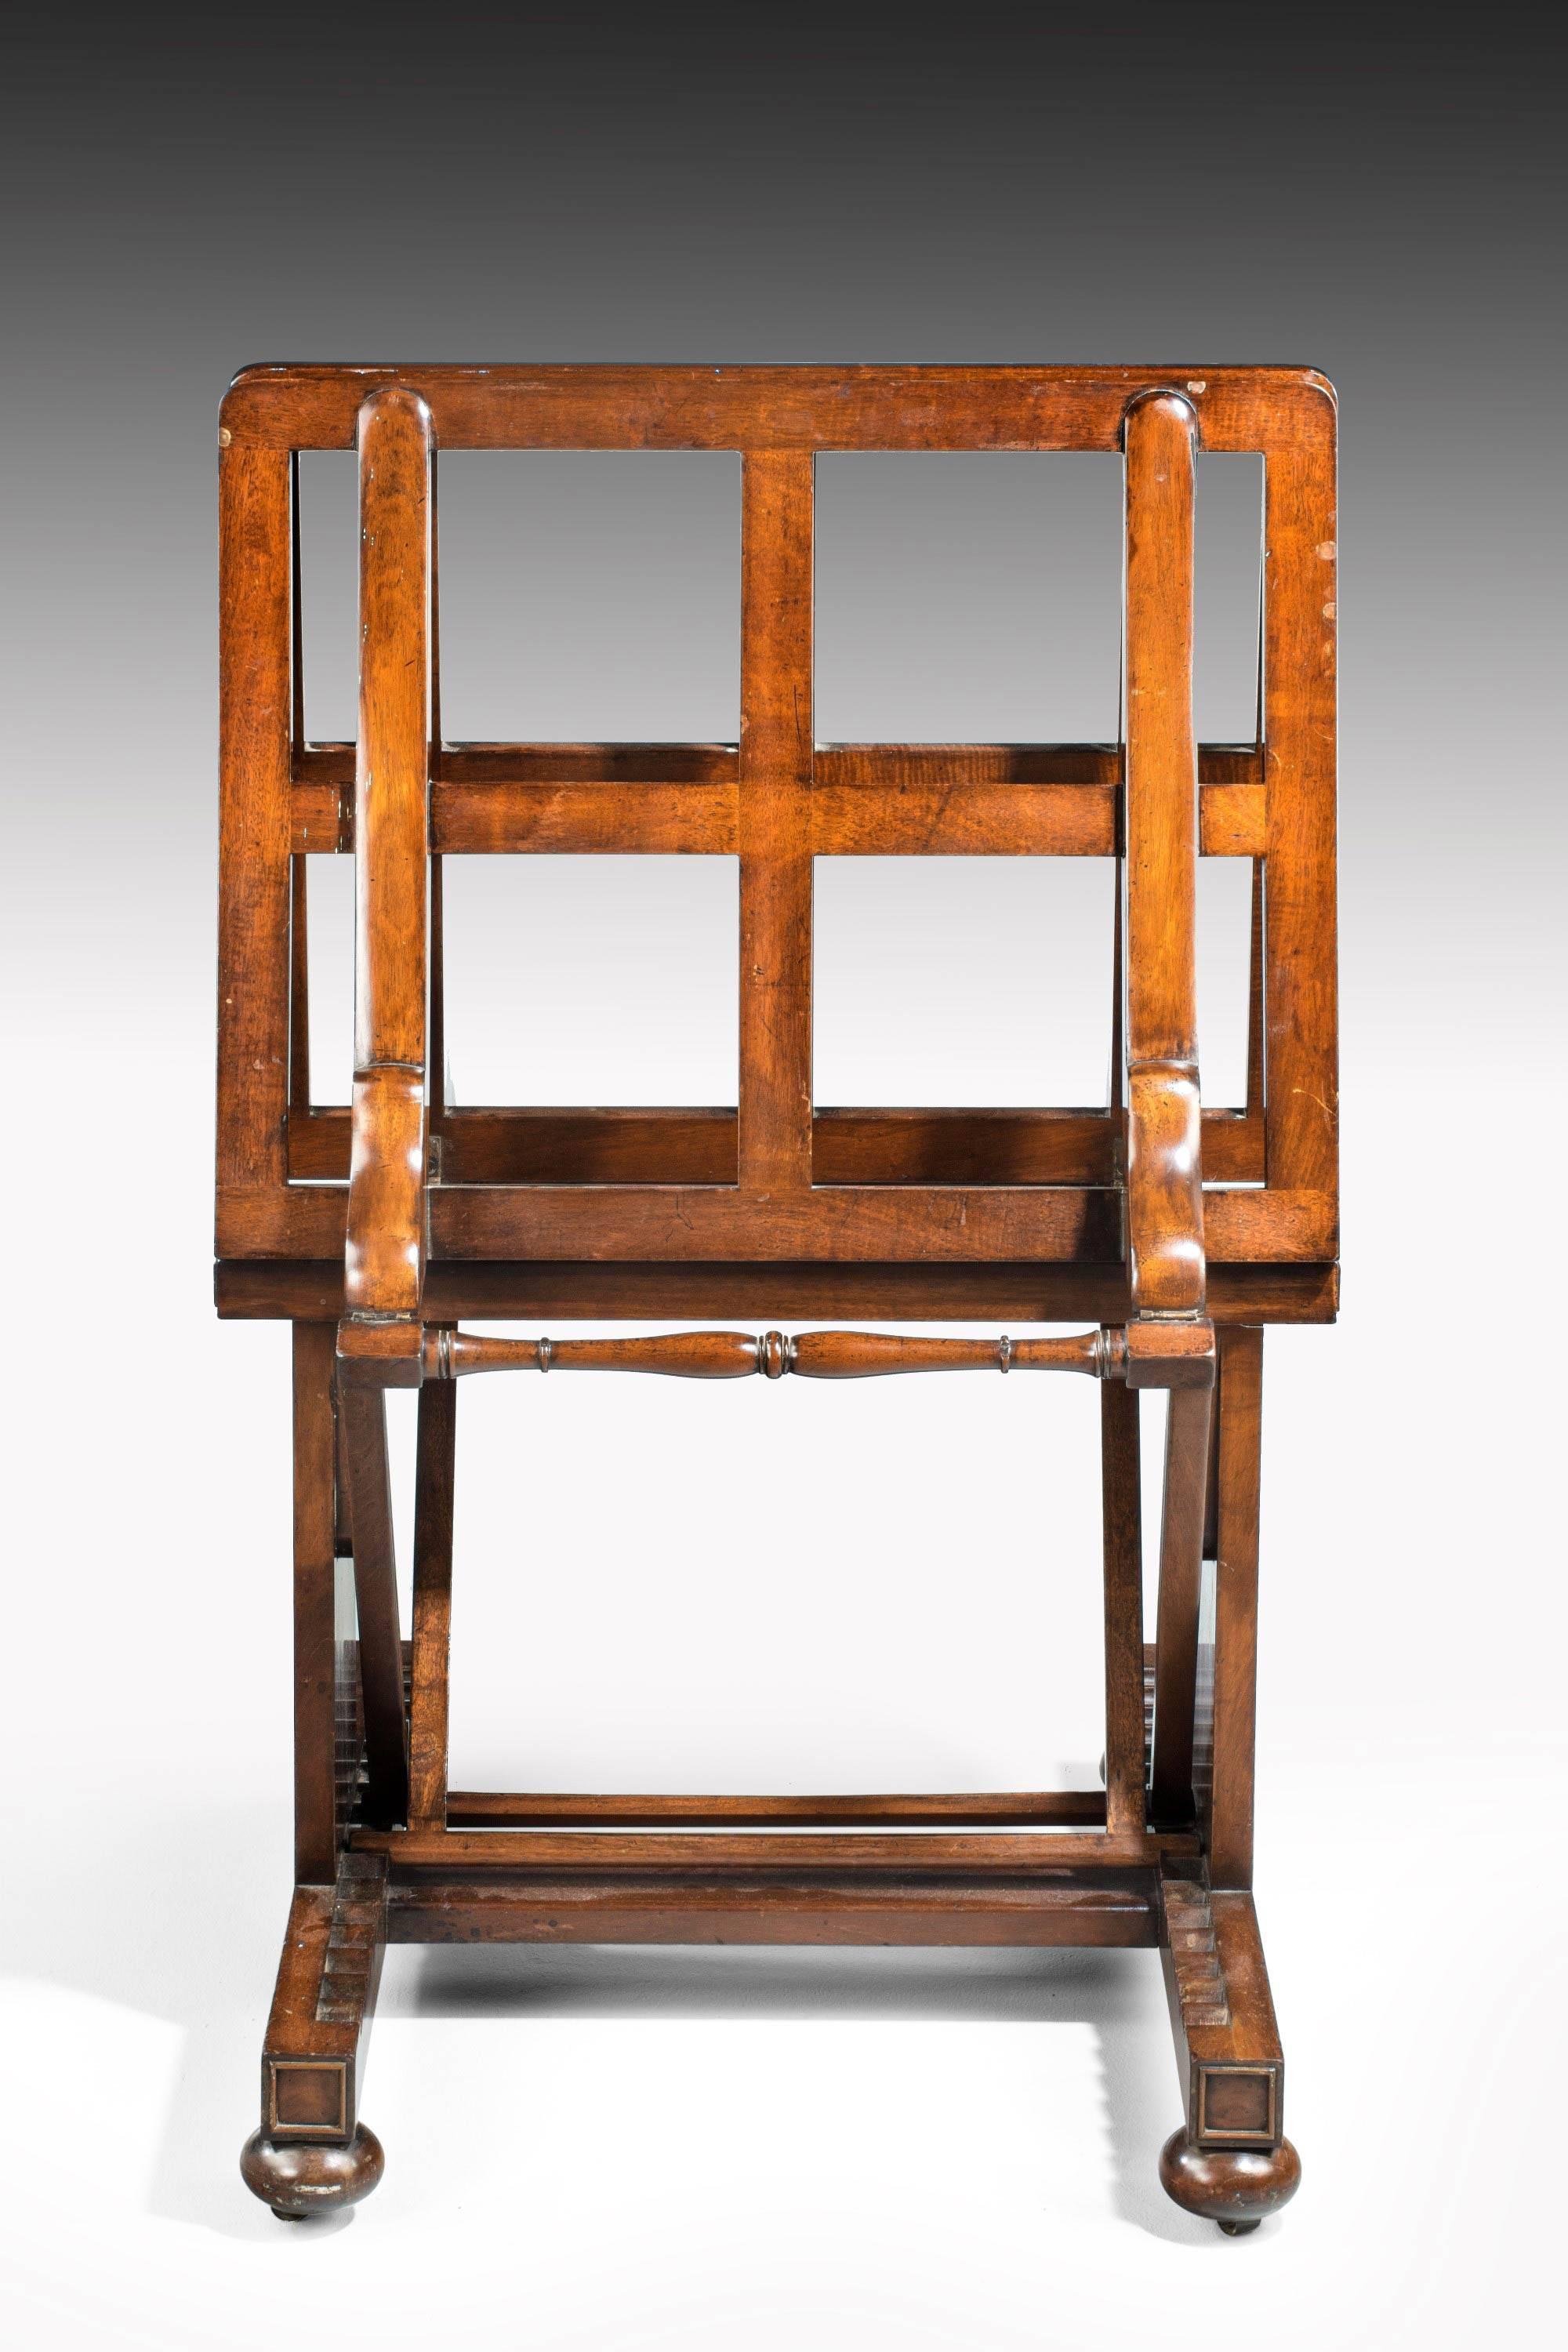 A very fine quality mahogany architects folio stand on ratcheted supports. Excellent overall condition. 

Measure: When fully open the width 49 inches.